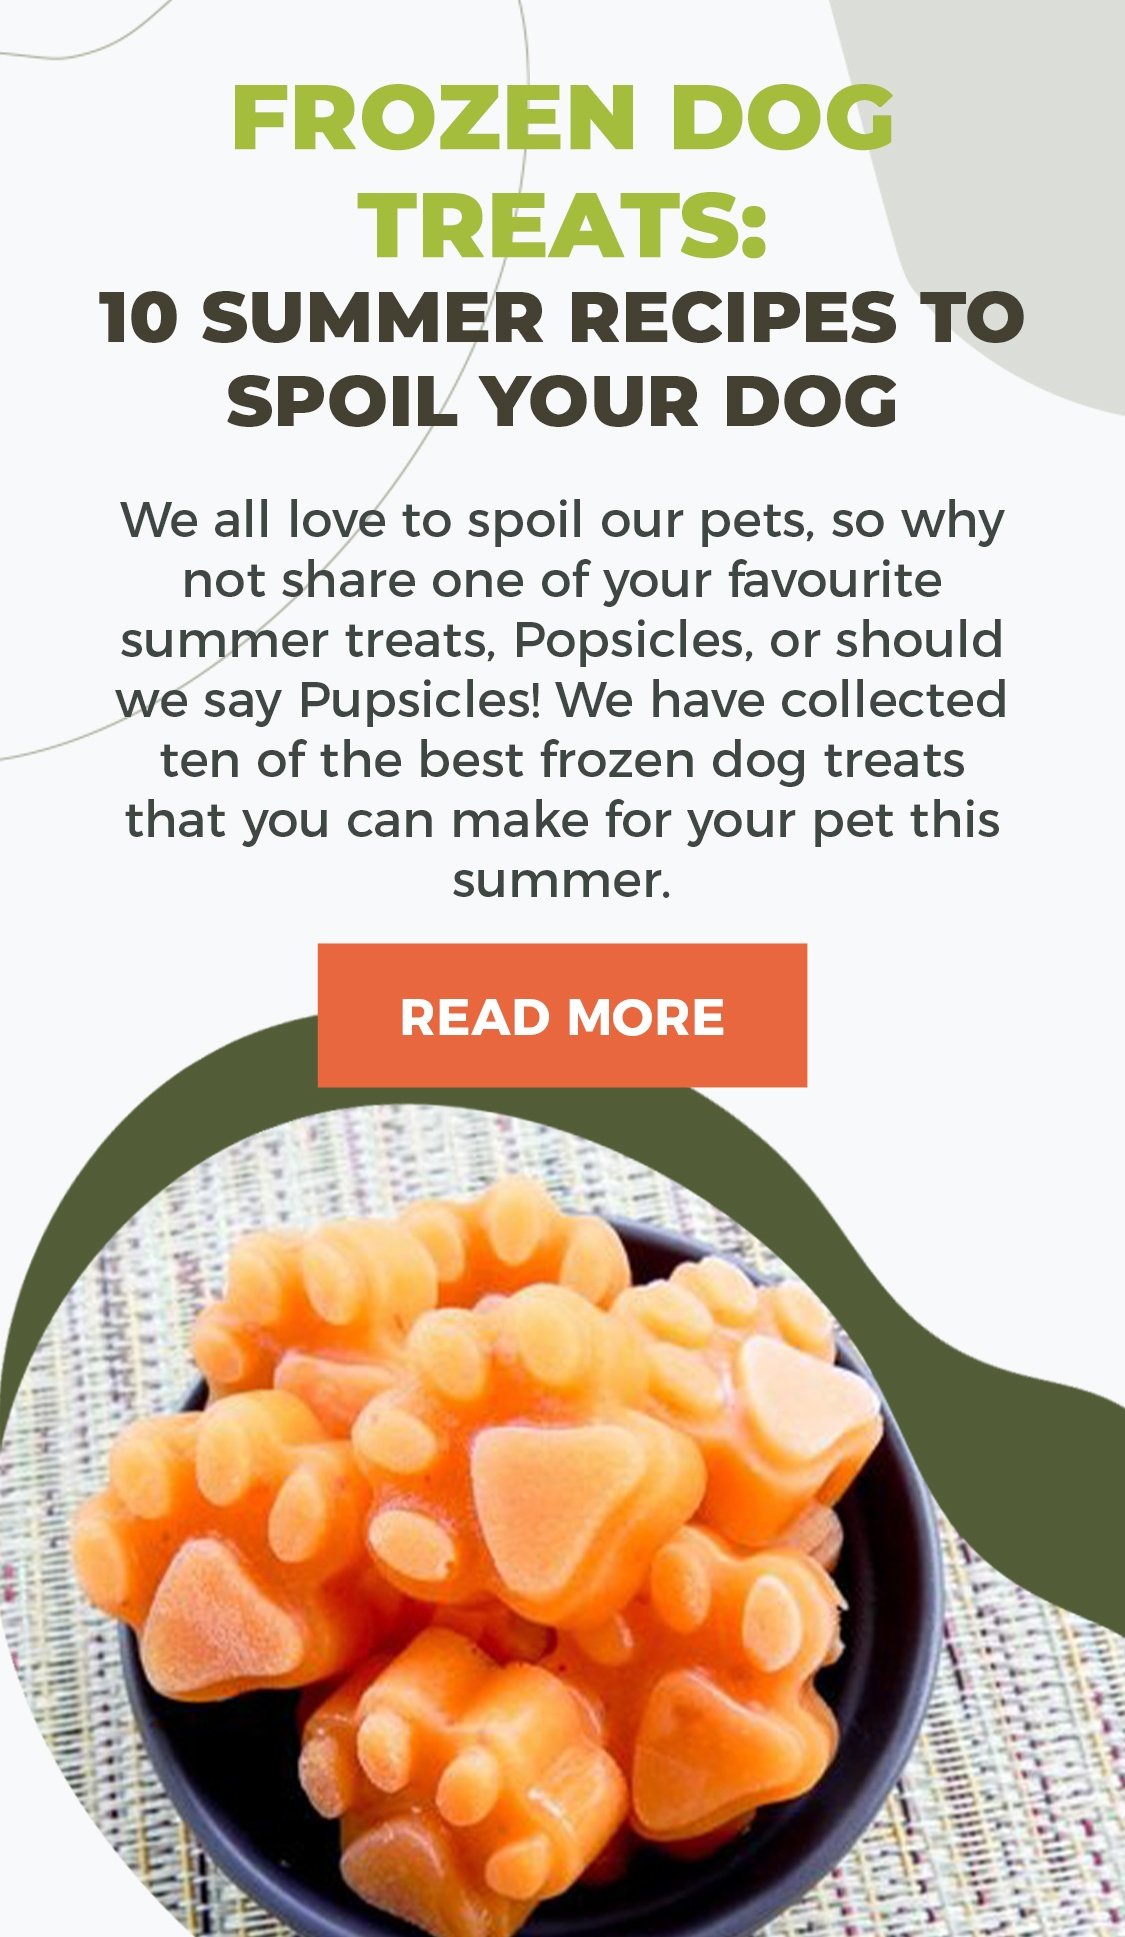 Frozen Kong Treats: 5 Easy Summer Recipes to Keep Your Dog Cool